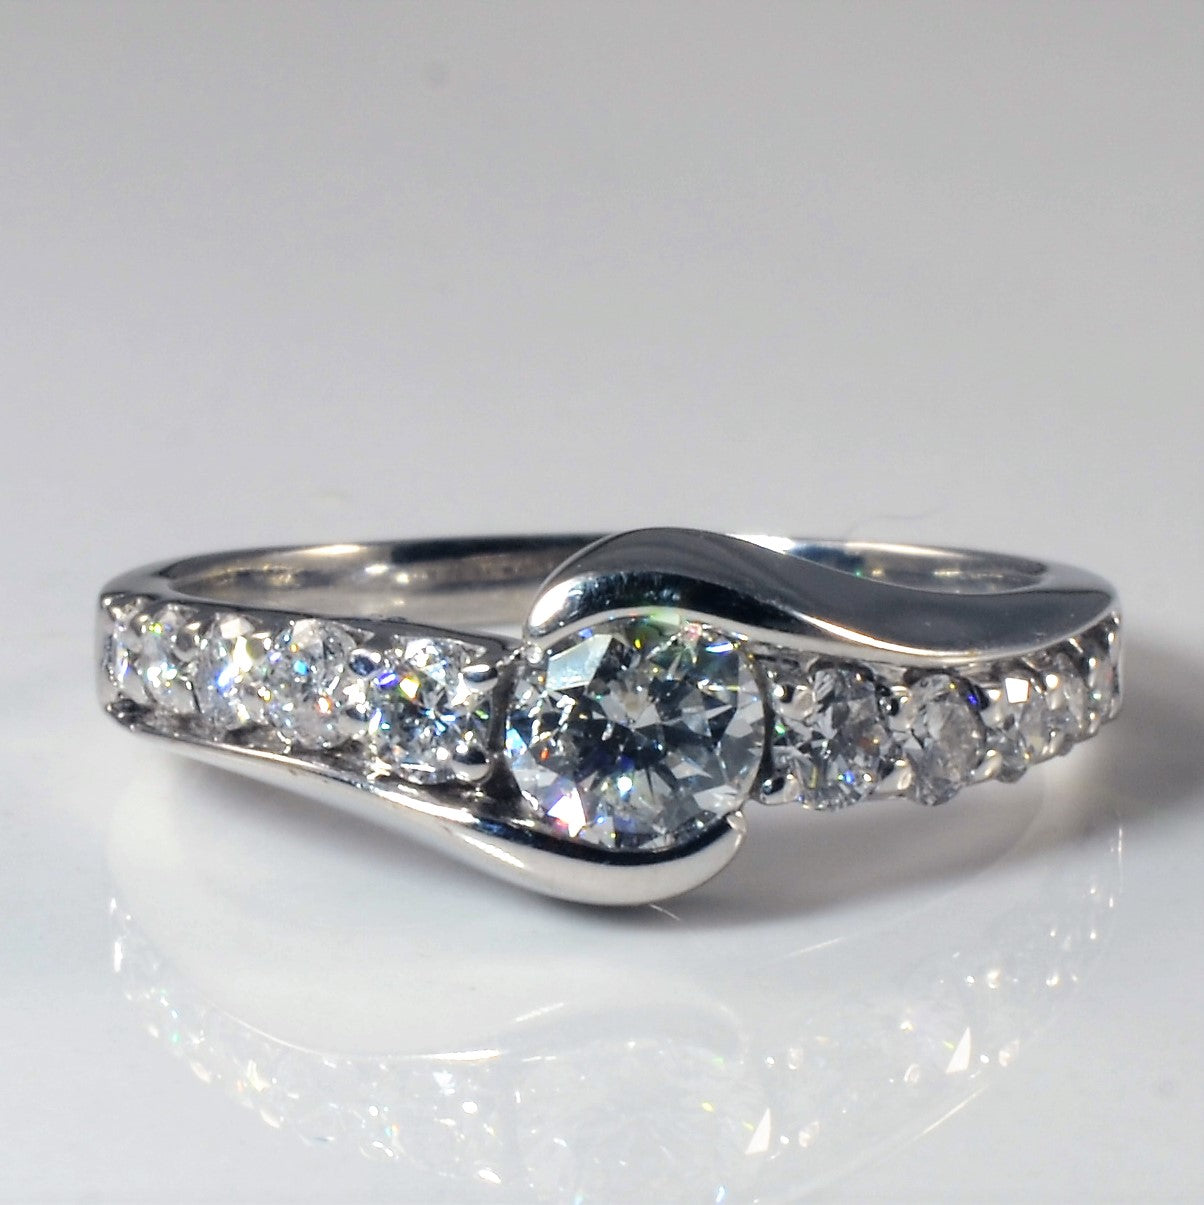 Pave Bypass Diamond Engagement Ring | 0.91ctw | SZ 7.5 |